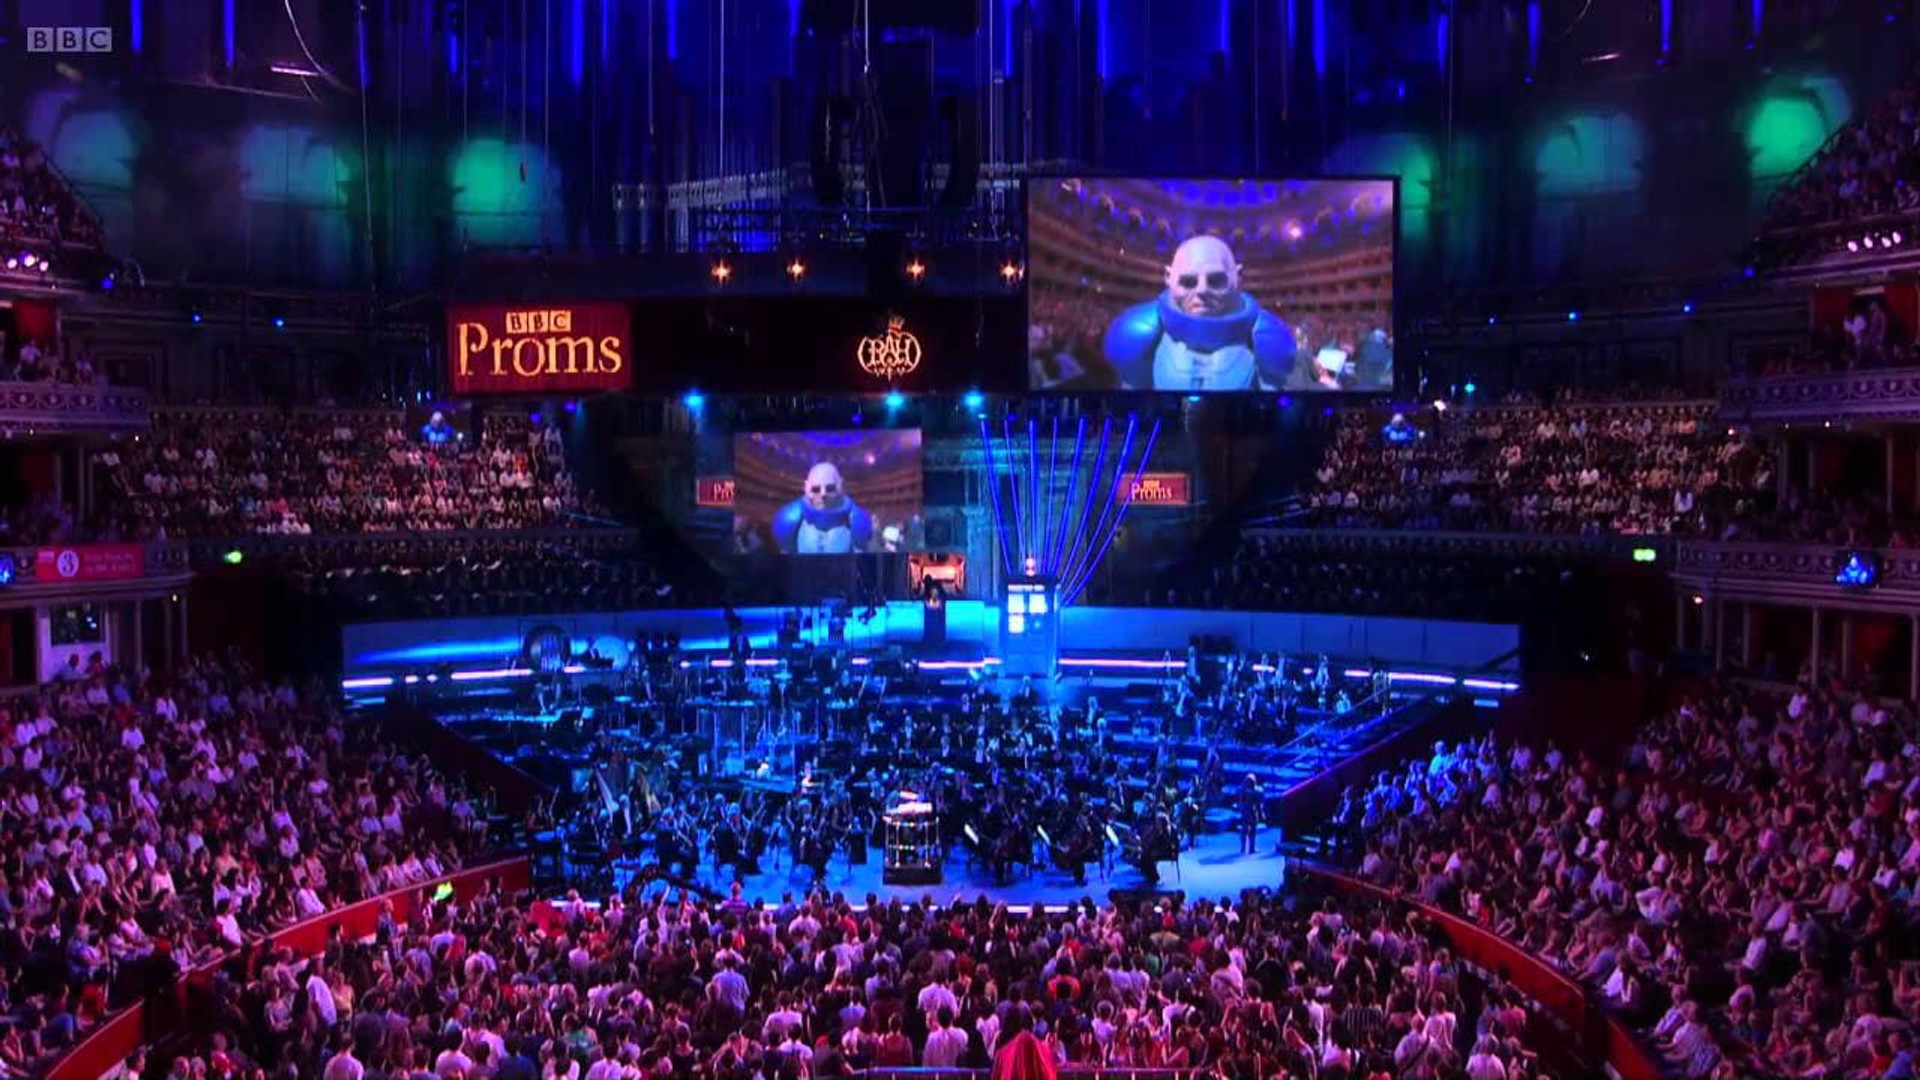 Doctor Who at the Proms background